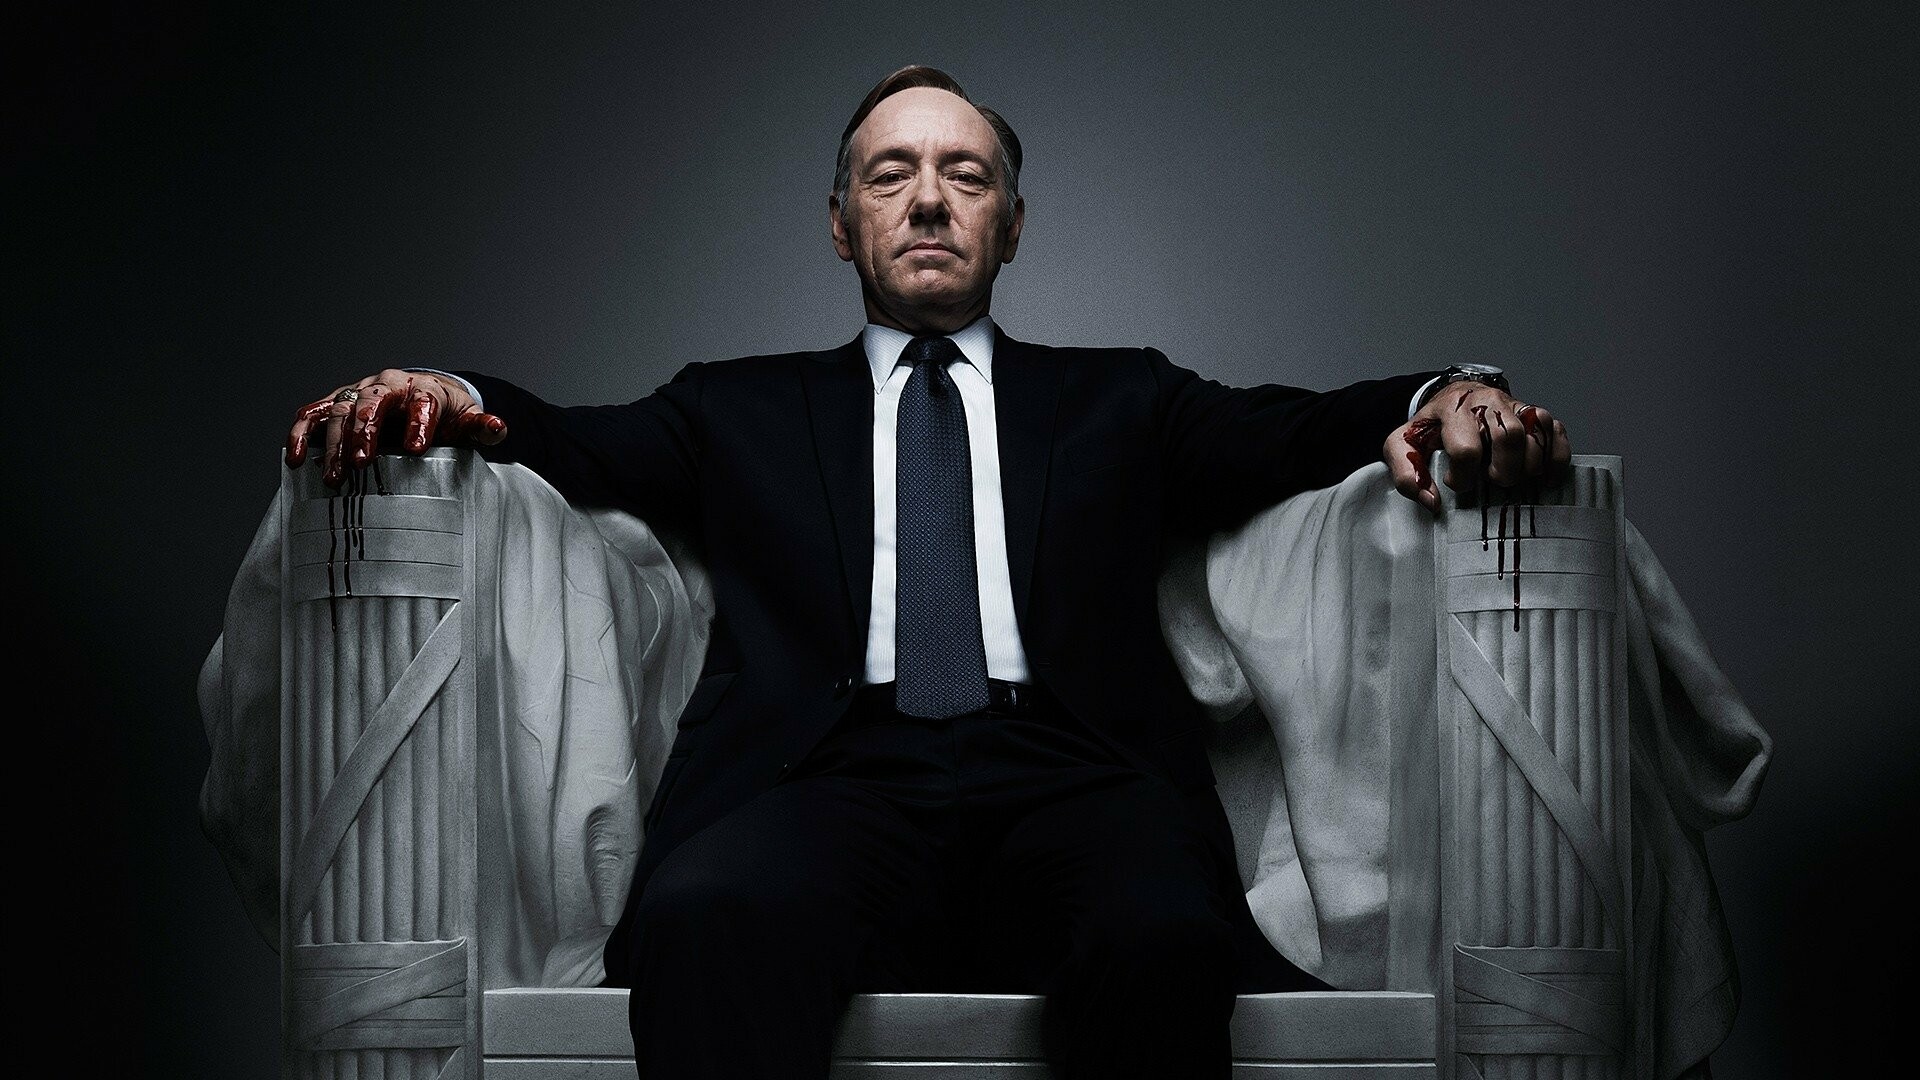 House of Cards: Frank Underwood, served as the 49th Vice President of the United States from 2013 to 2014. 1920x1080 Full HD Wallpaper.